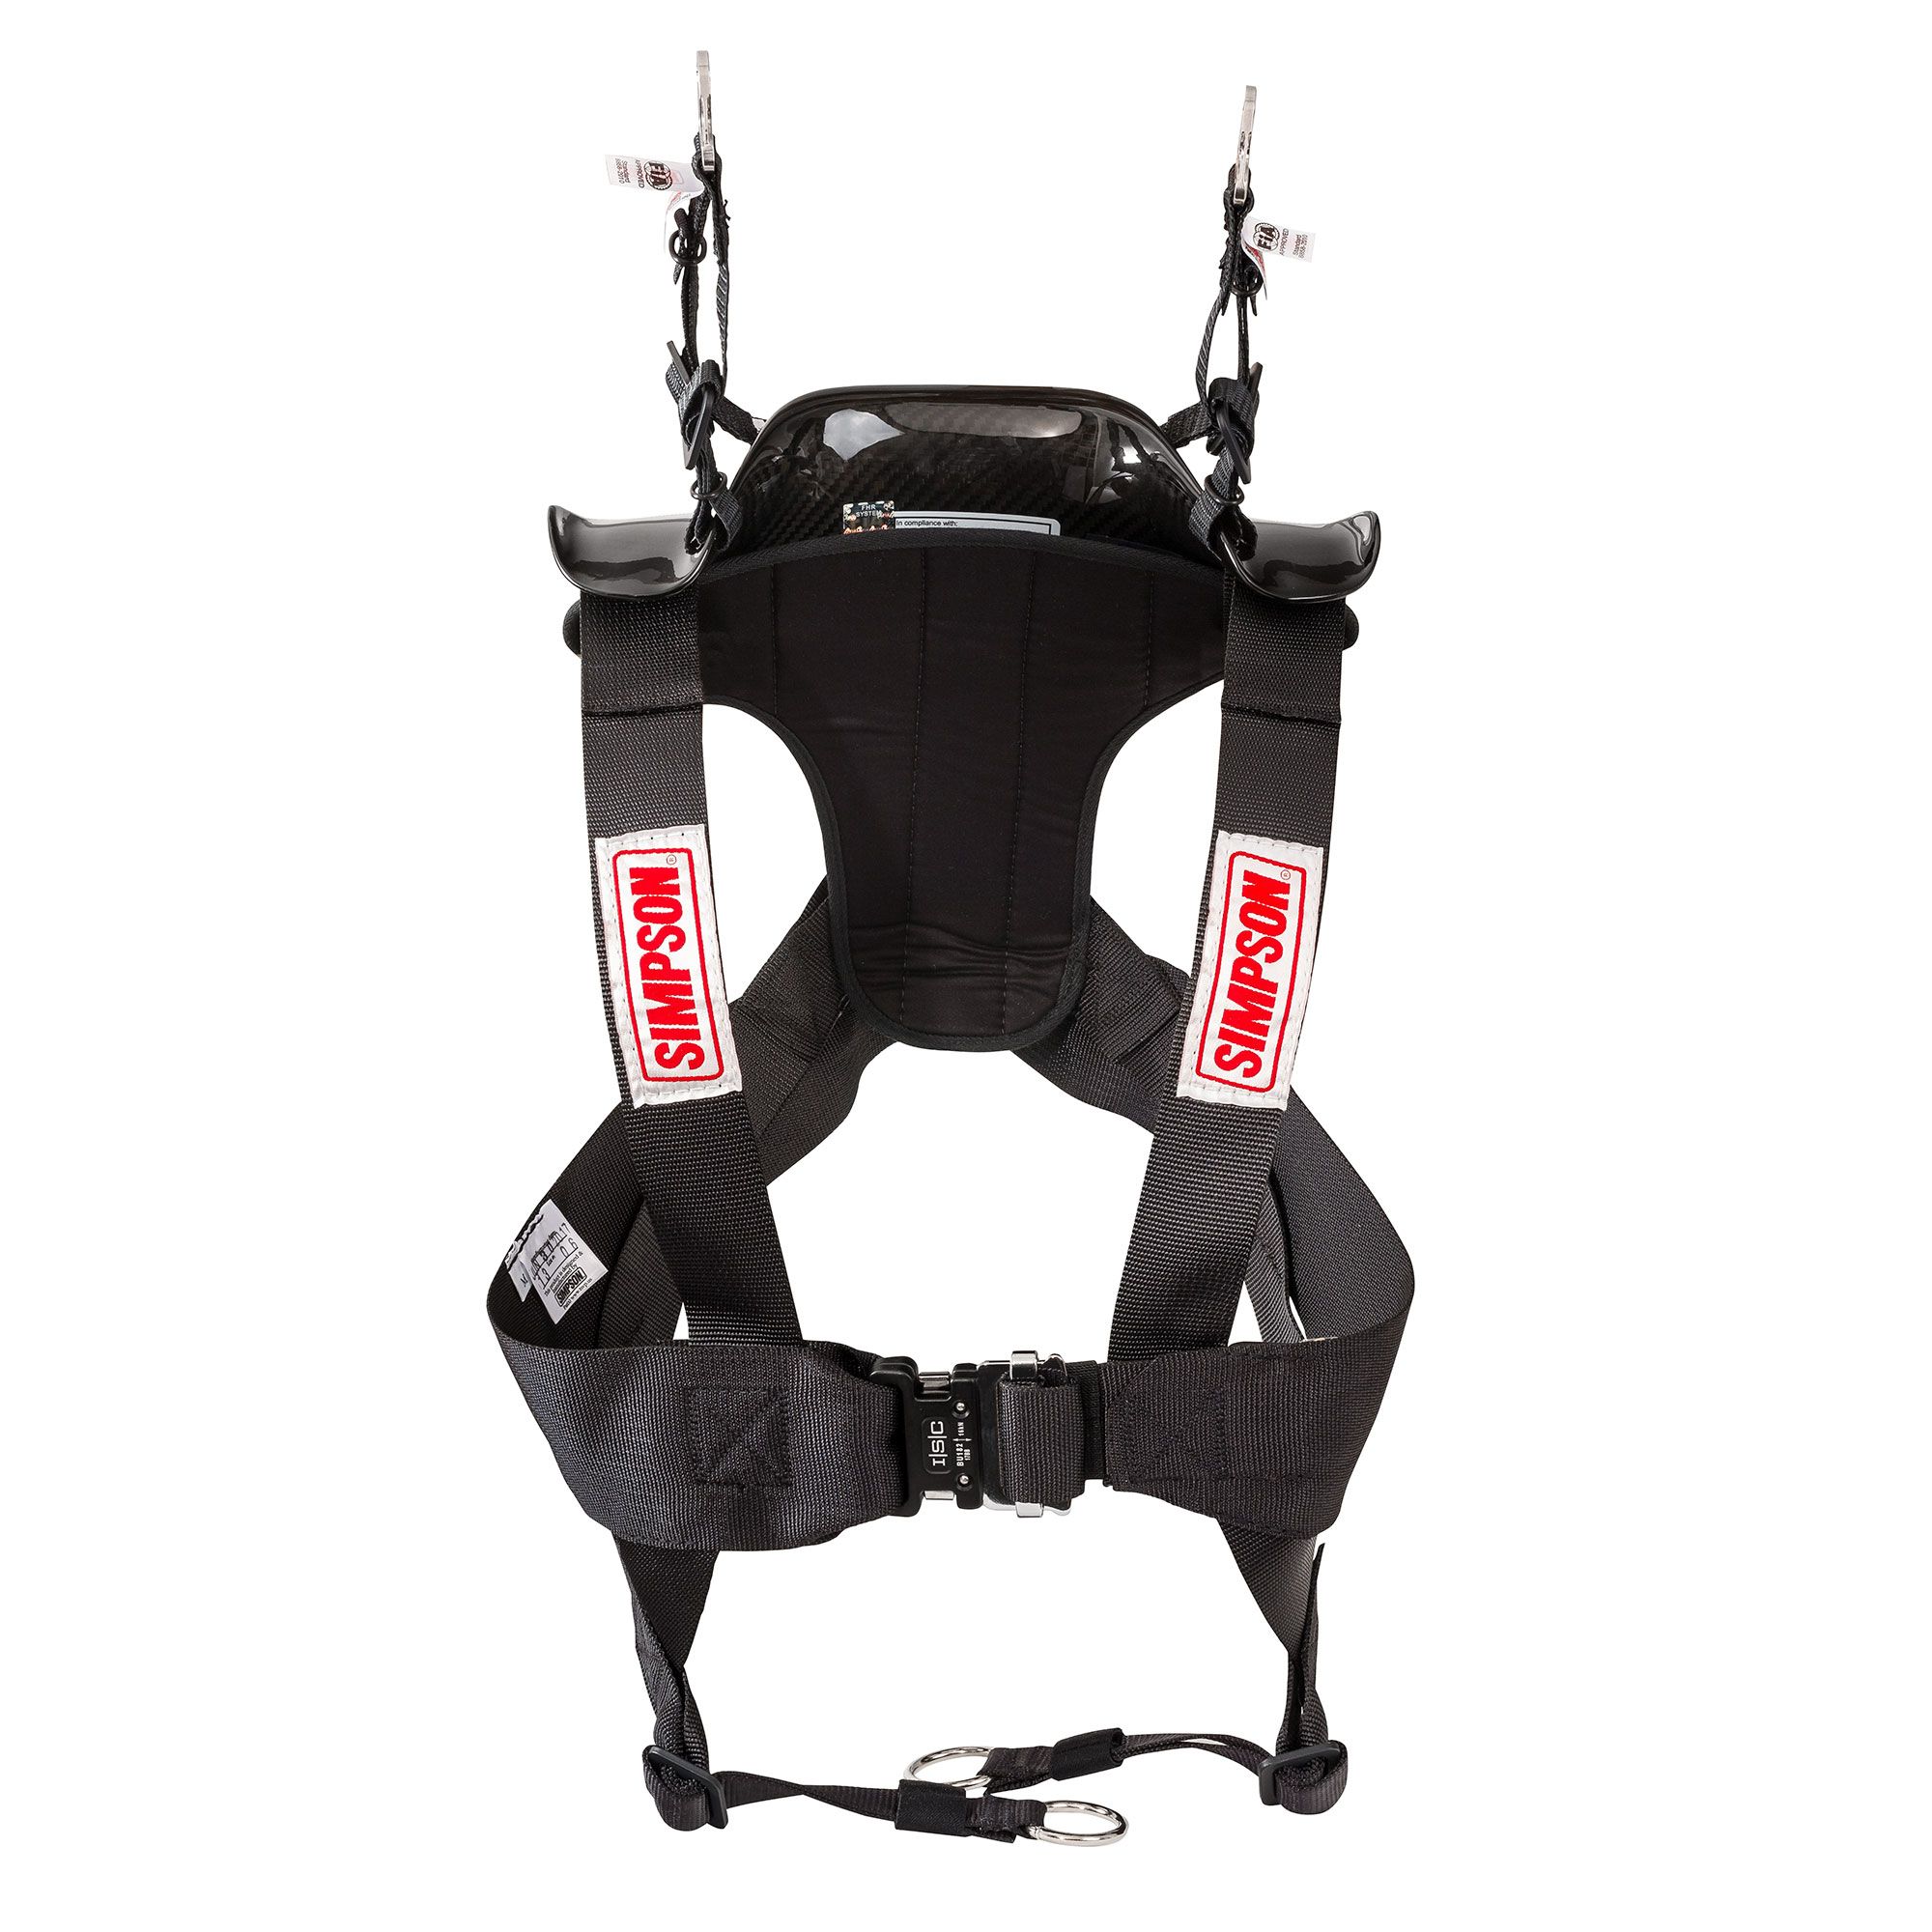 r3 head and neck restraint systems